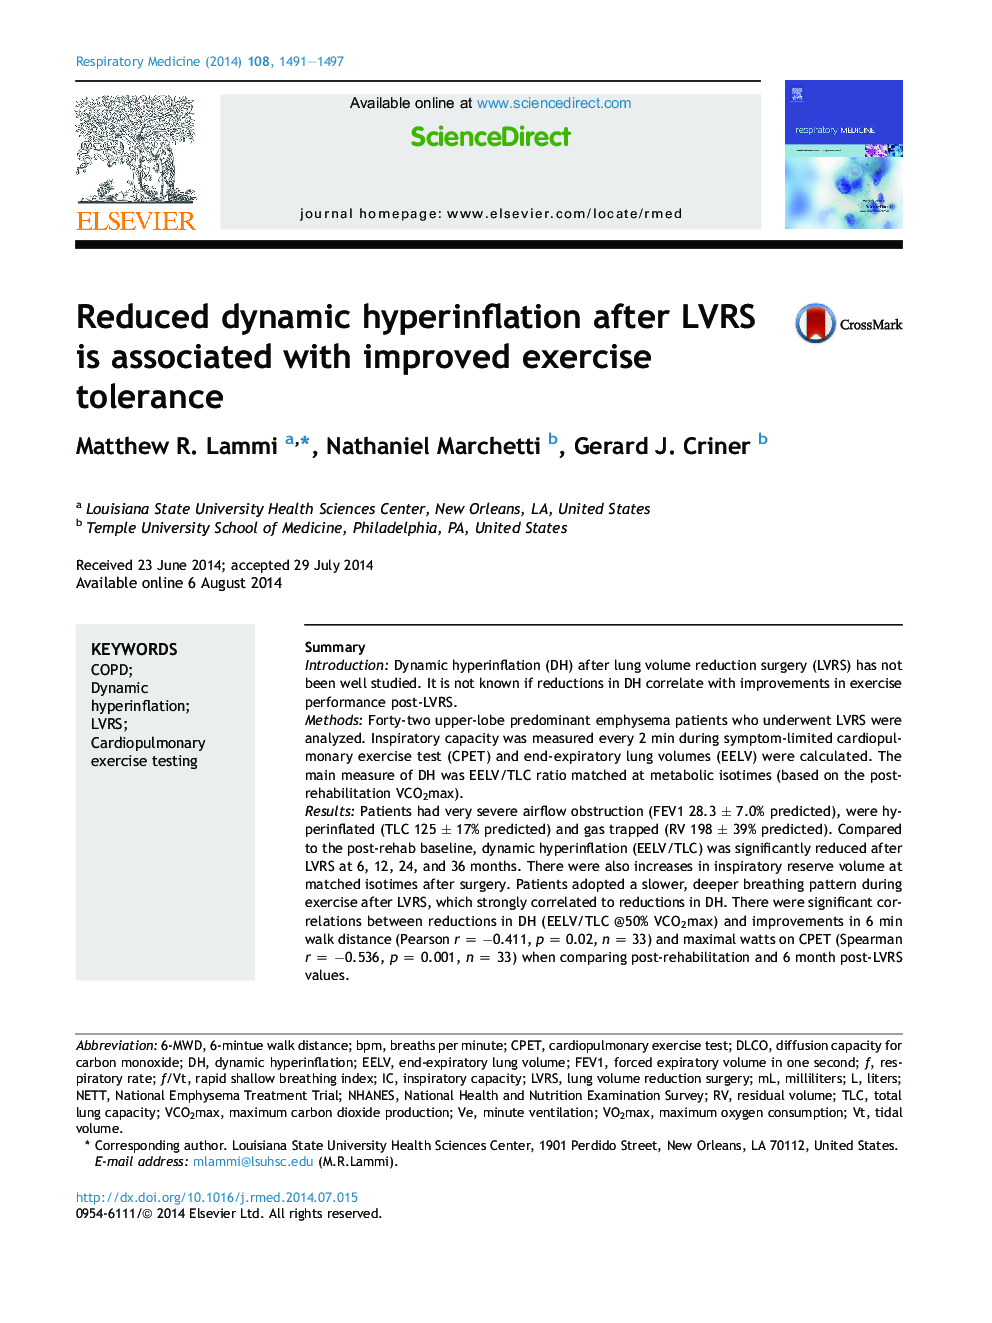 Reduced dynamic hyperinflation after LVRS is associated with improved exercise tolerance